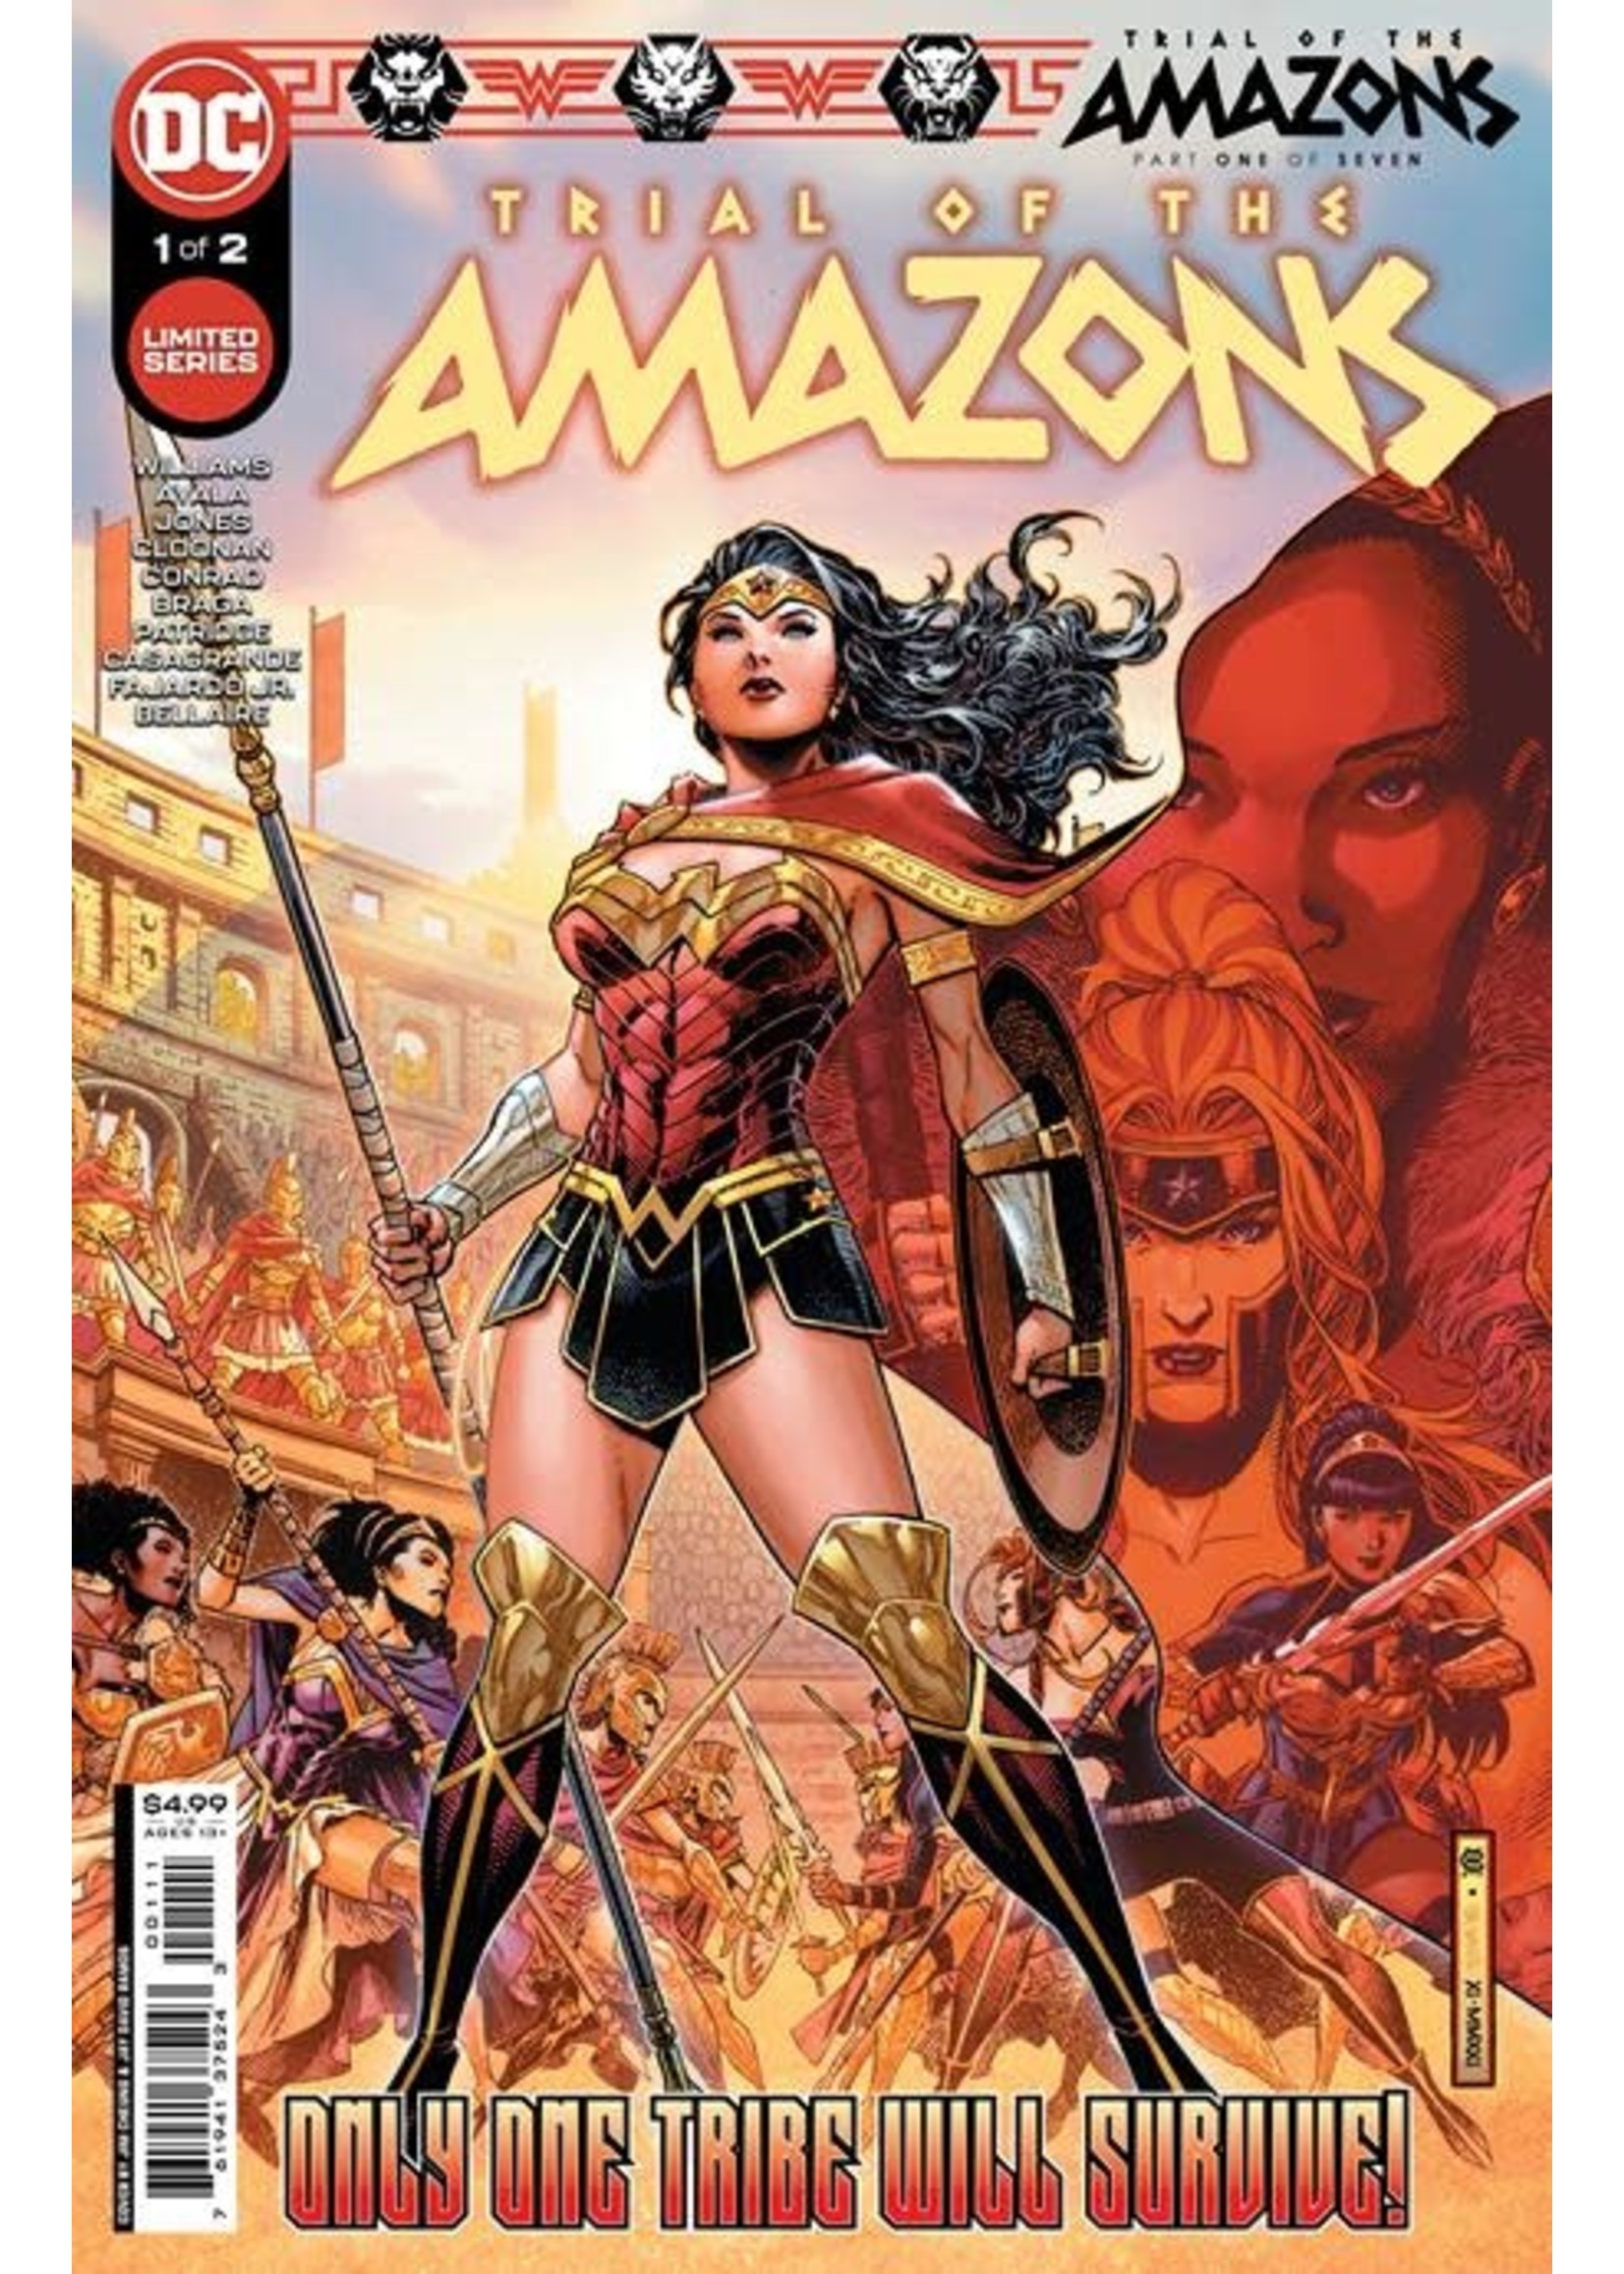 DC COMICS TRIAL OF THE AMAZONS #1 (OF 2) CVR A JIM CHEUNG